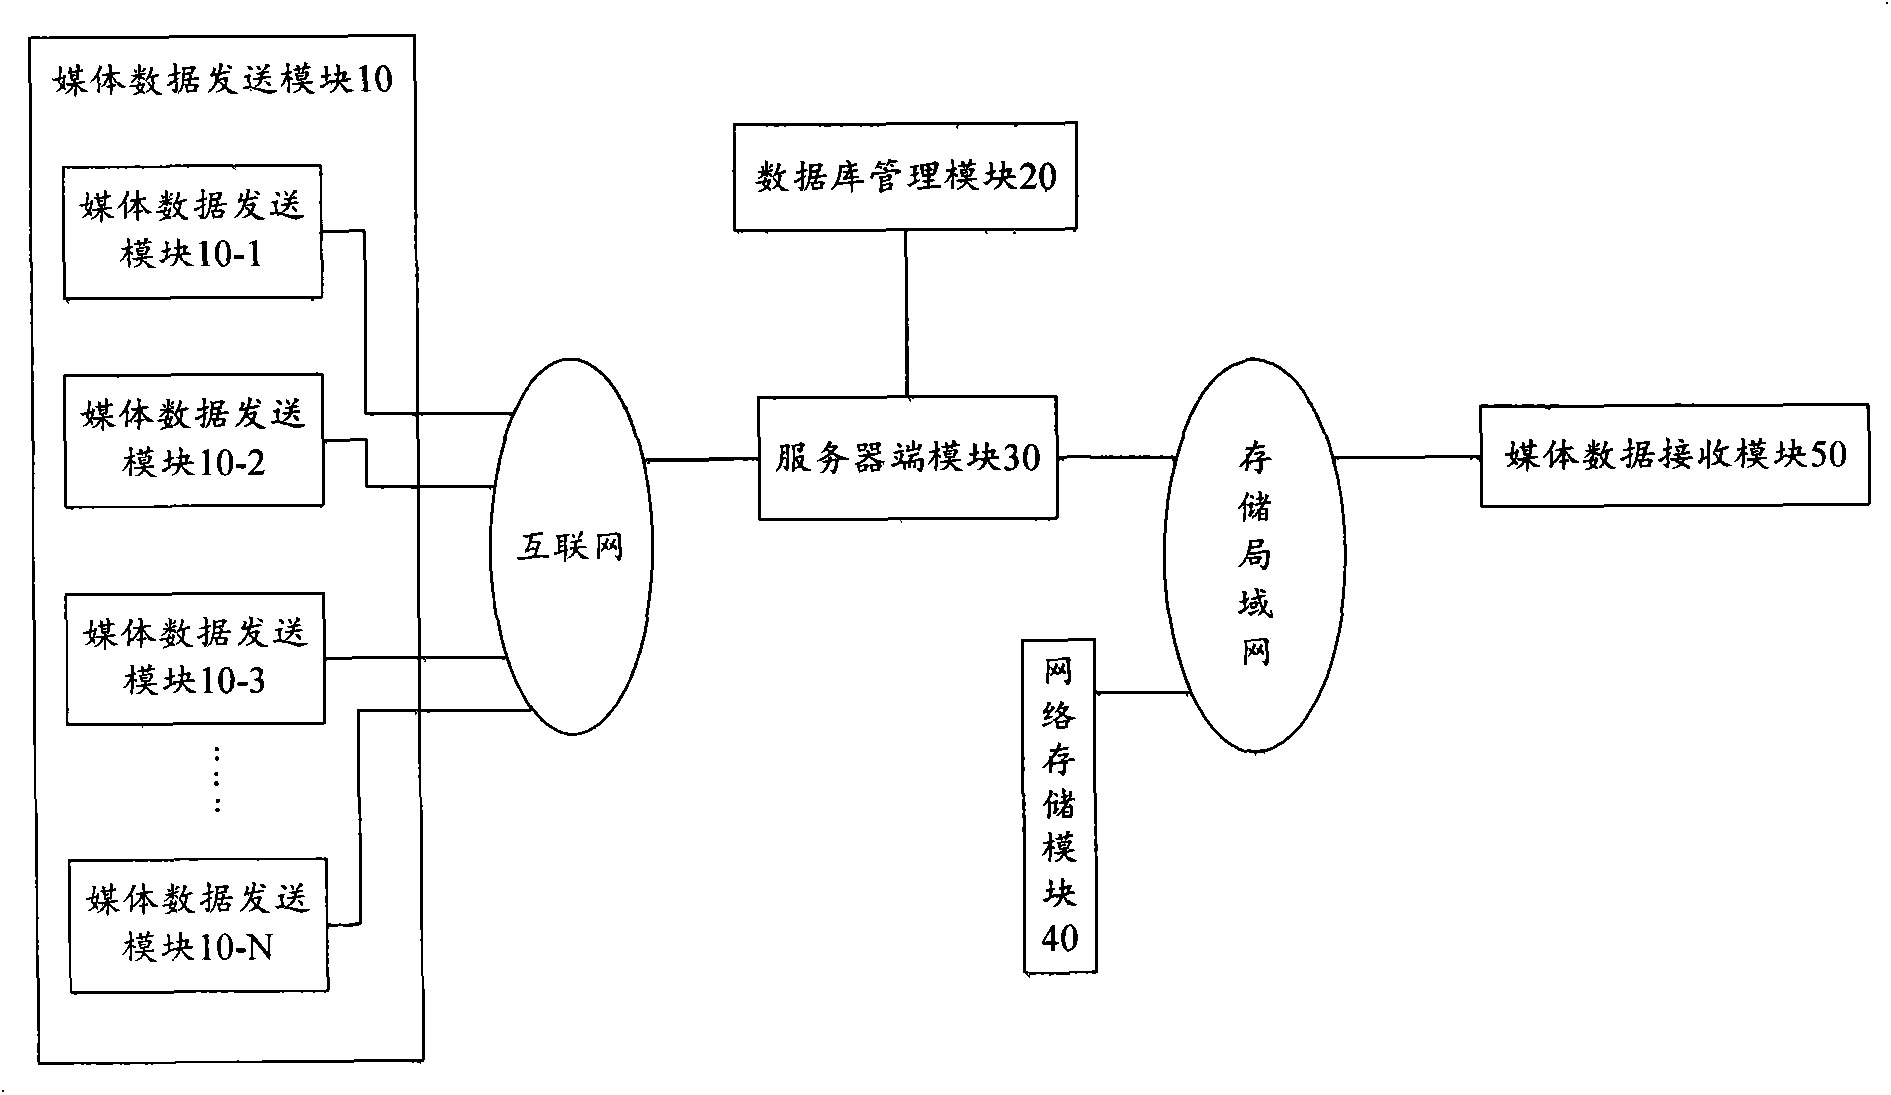 Networked multi-access media data transmission system